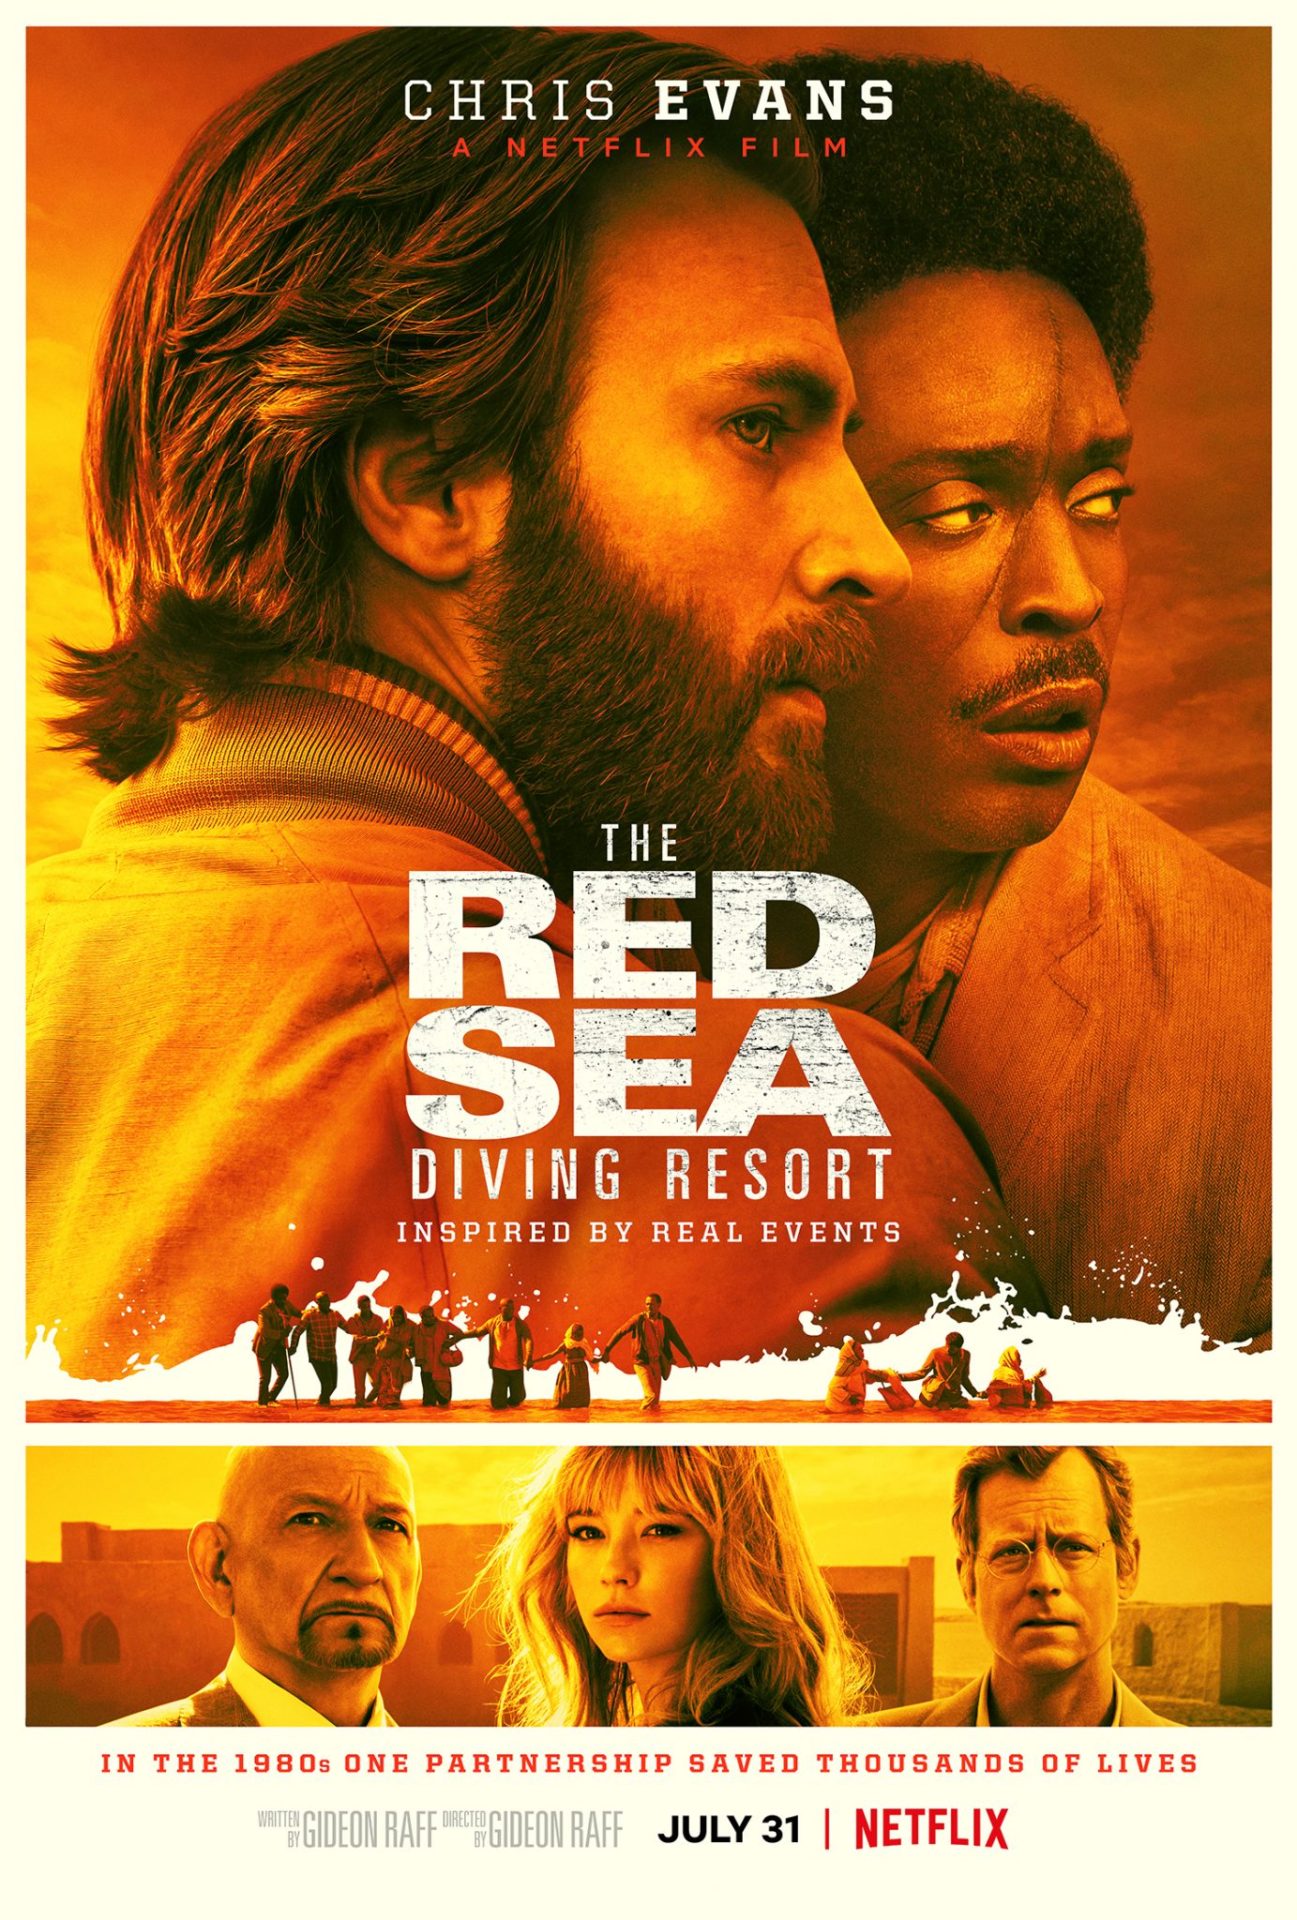 the red sea diving resort movie review